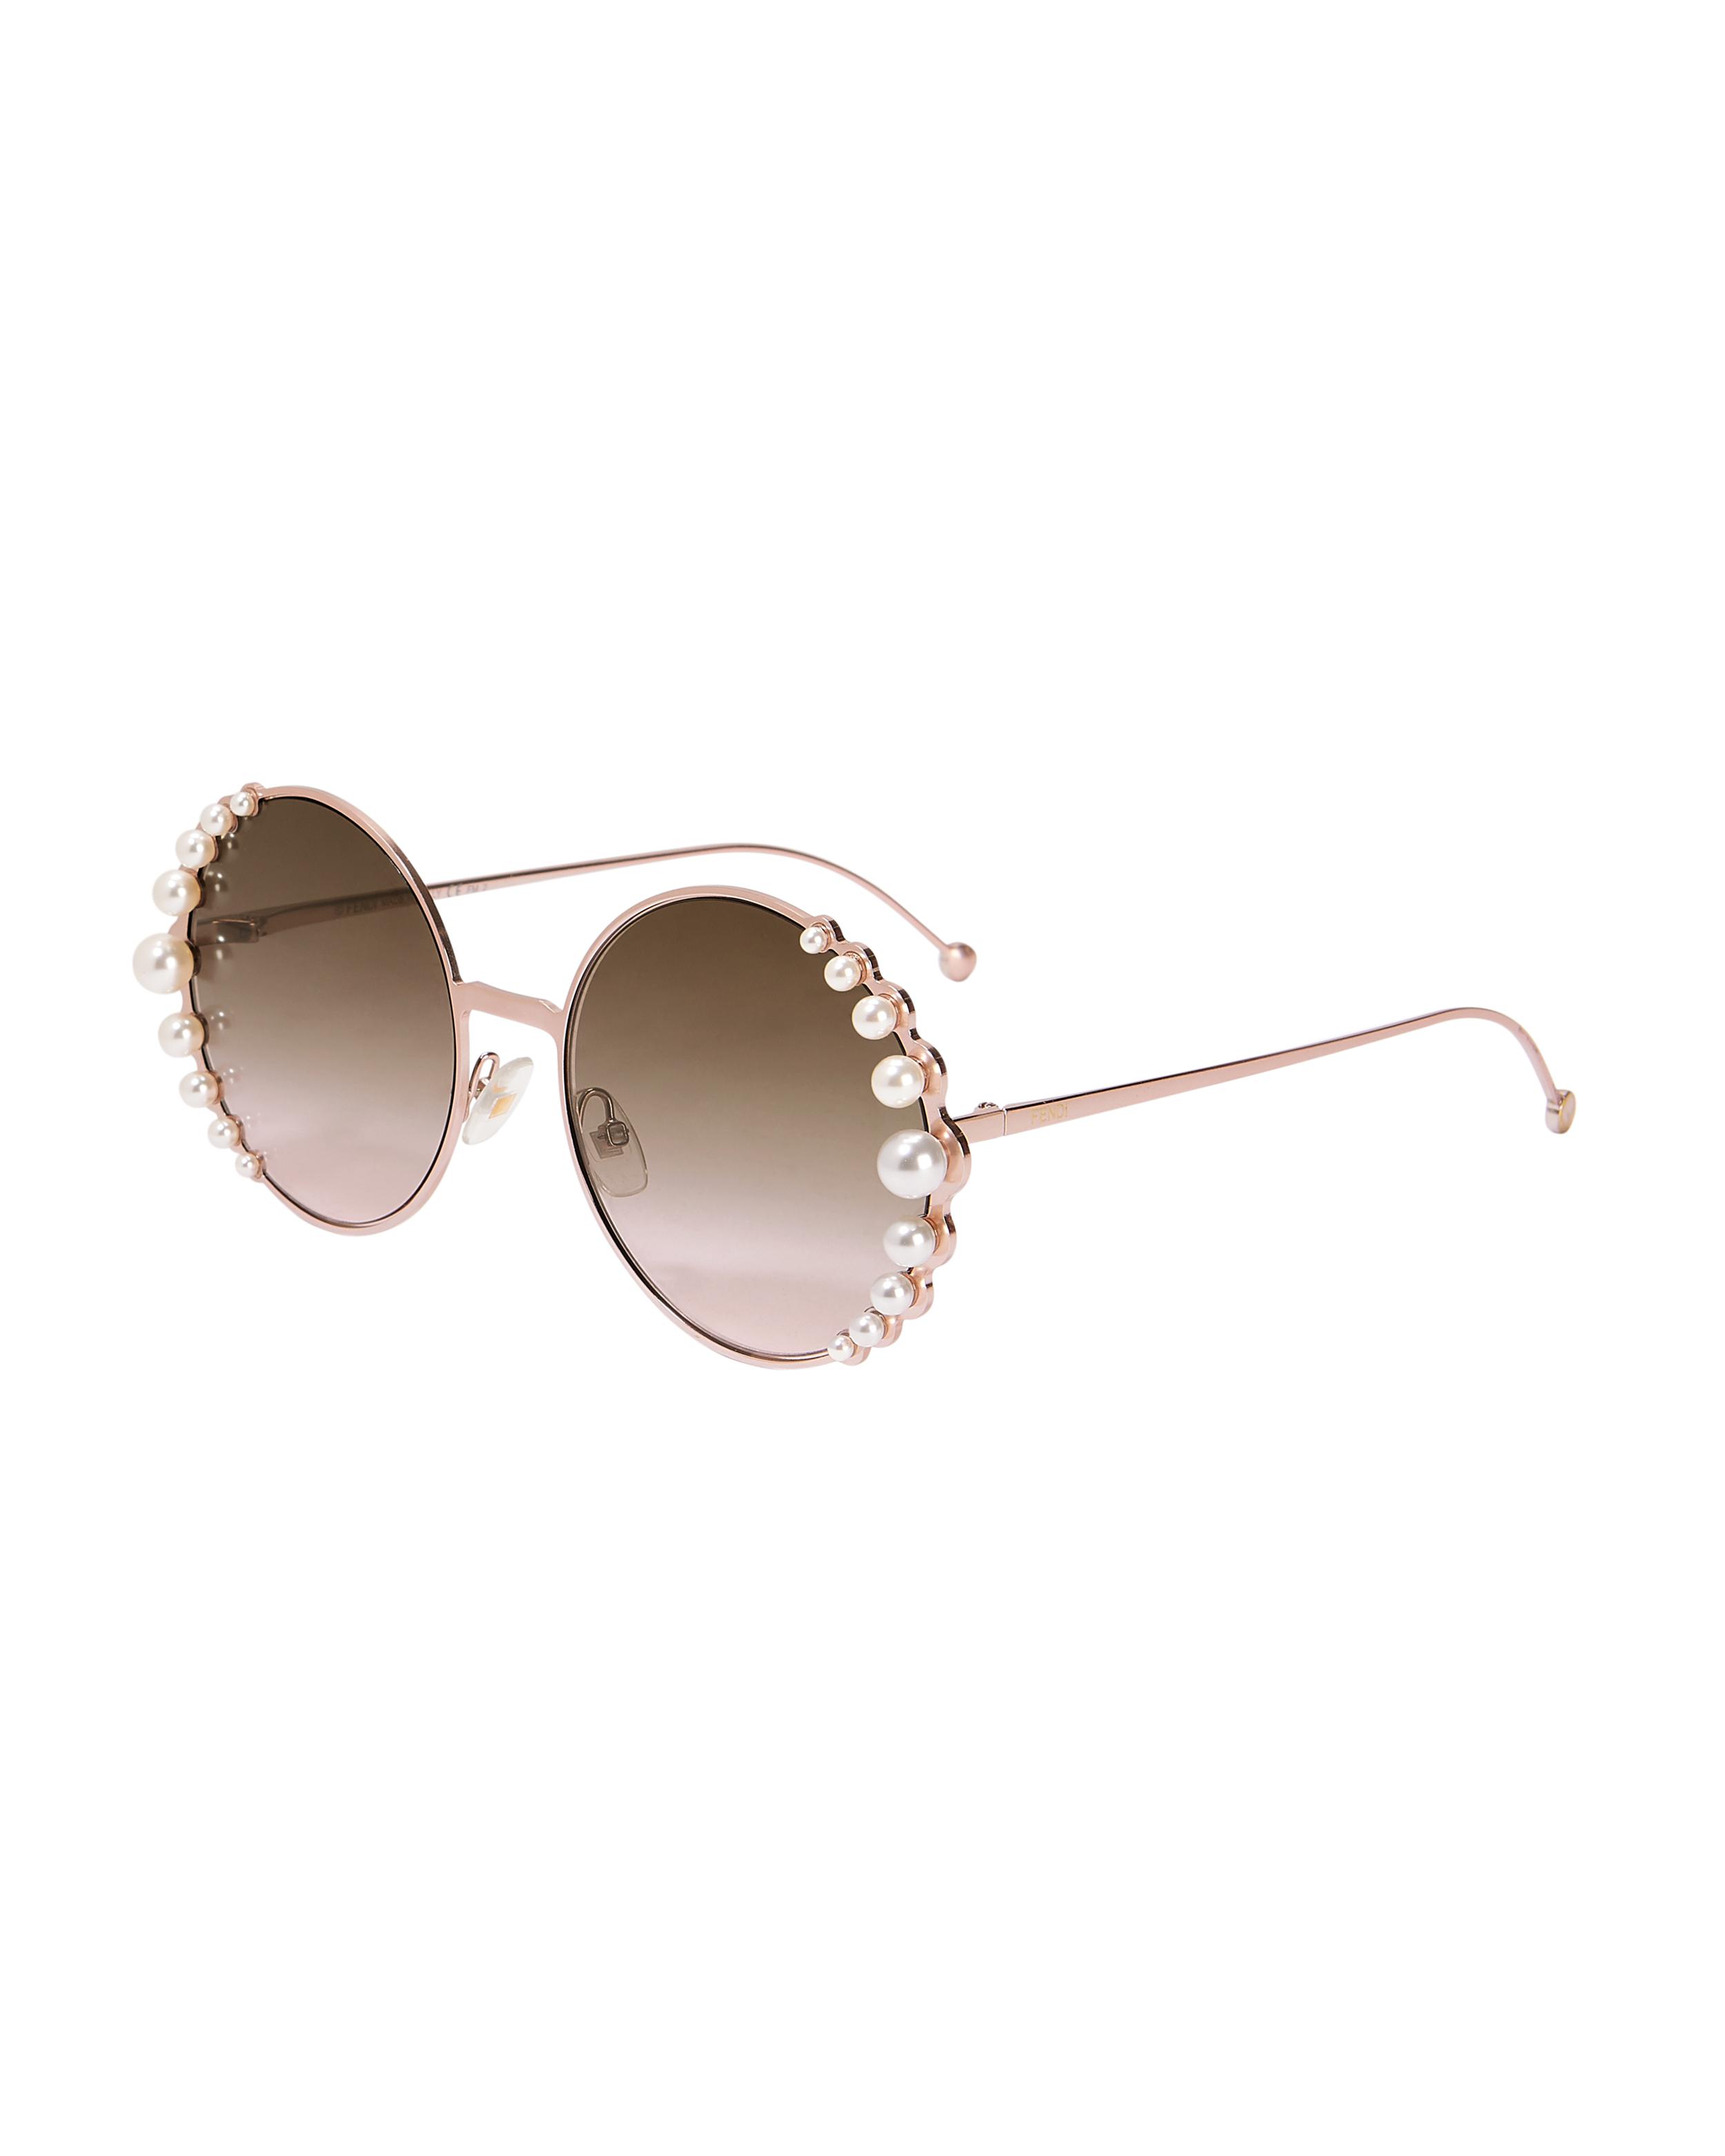 FHTH CC Round Sunglasses with Pearl Chain